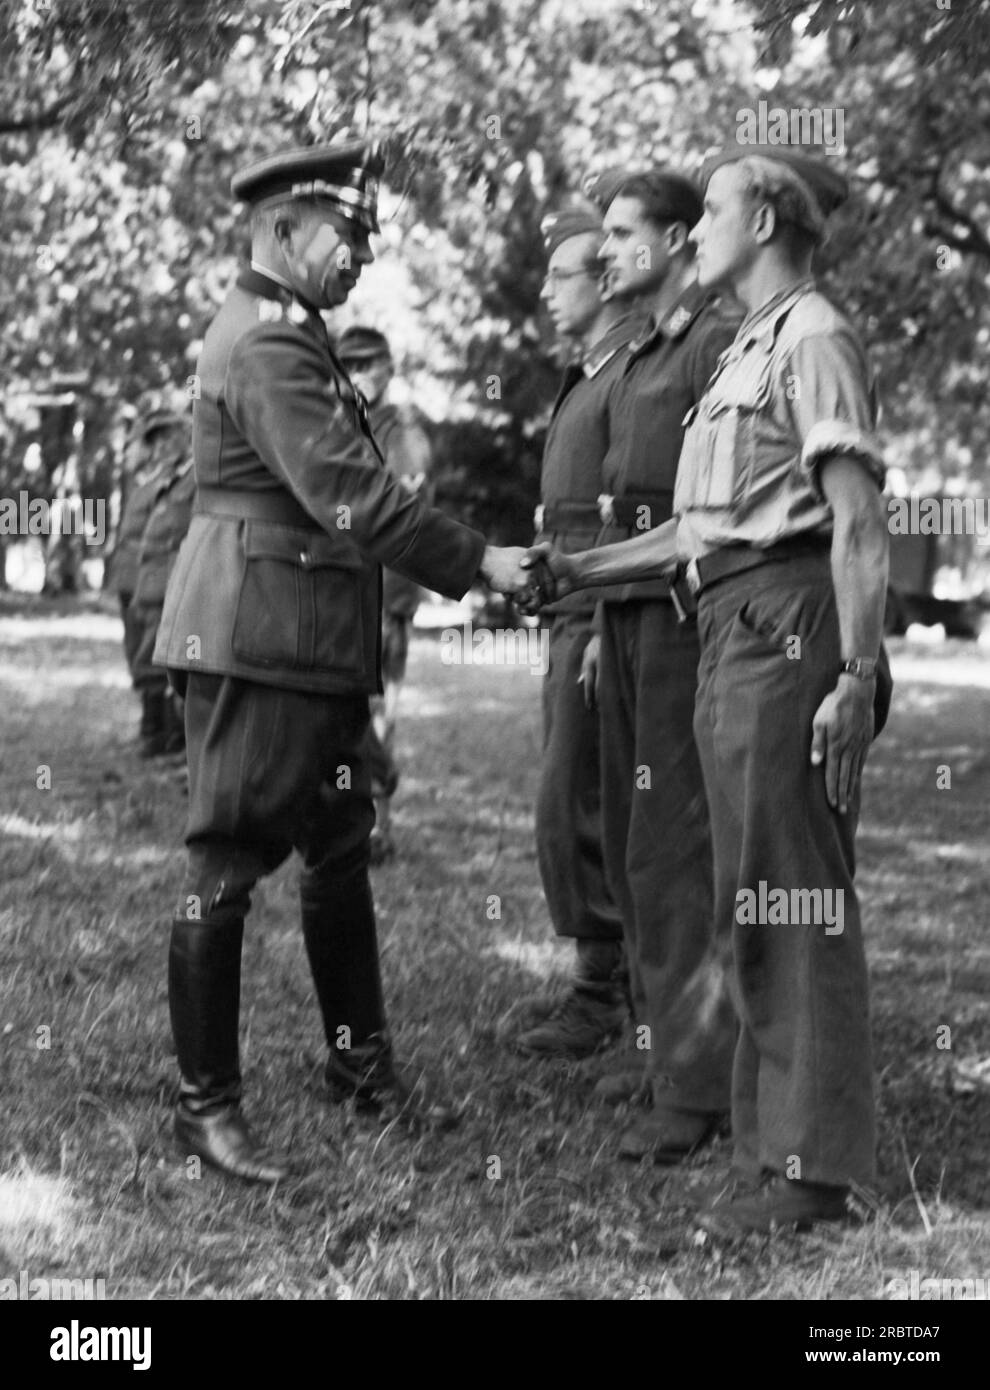 Loire River, France:  September 18, 1944 German Major General Erich Elster shakes hands with a cross section of his 19,000 men that he surrendered to the Americans. Stock Photo